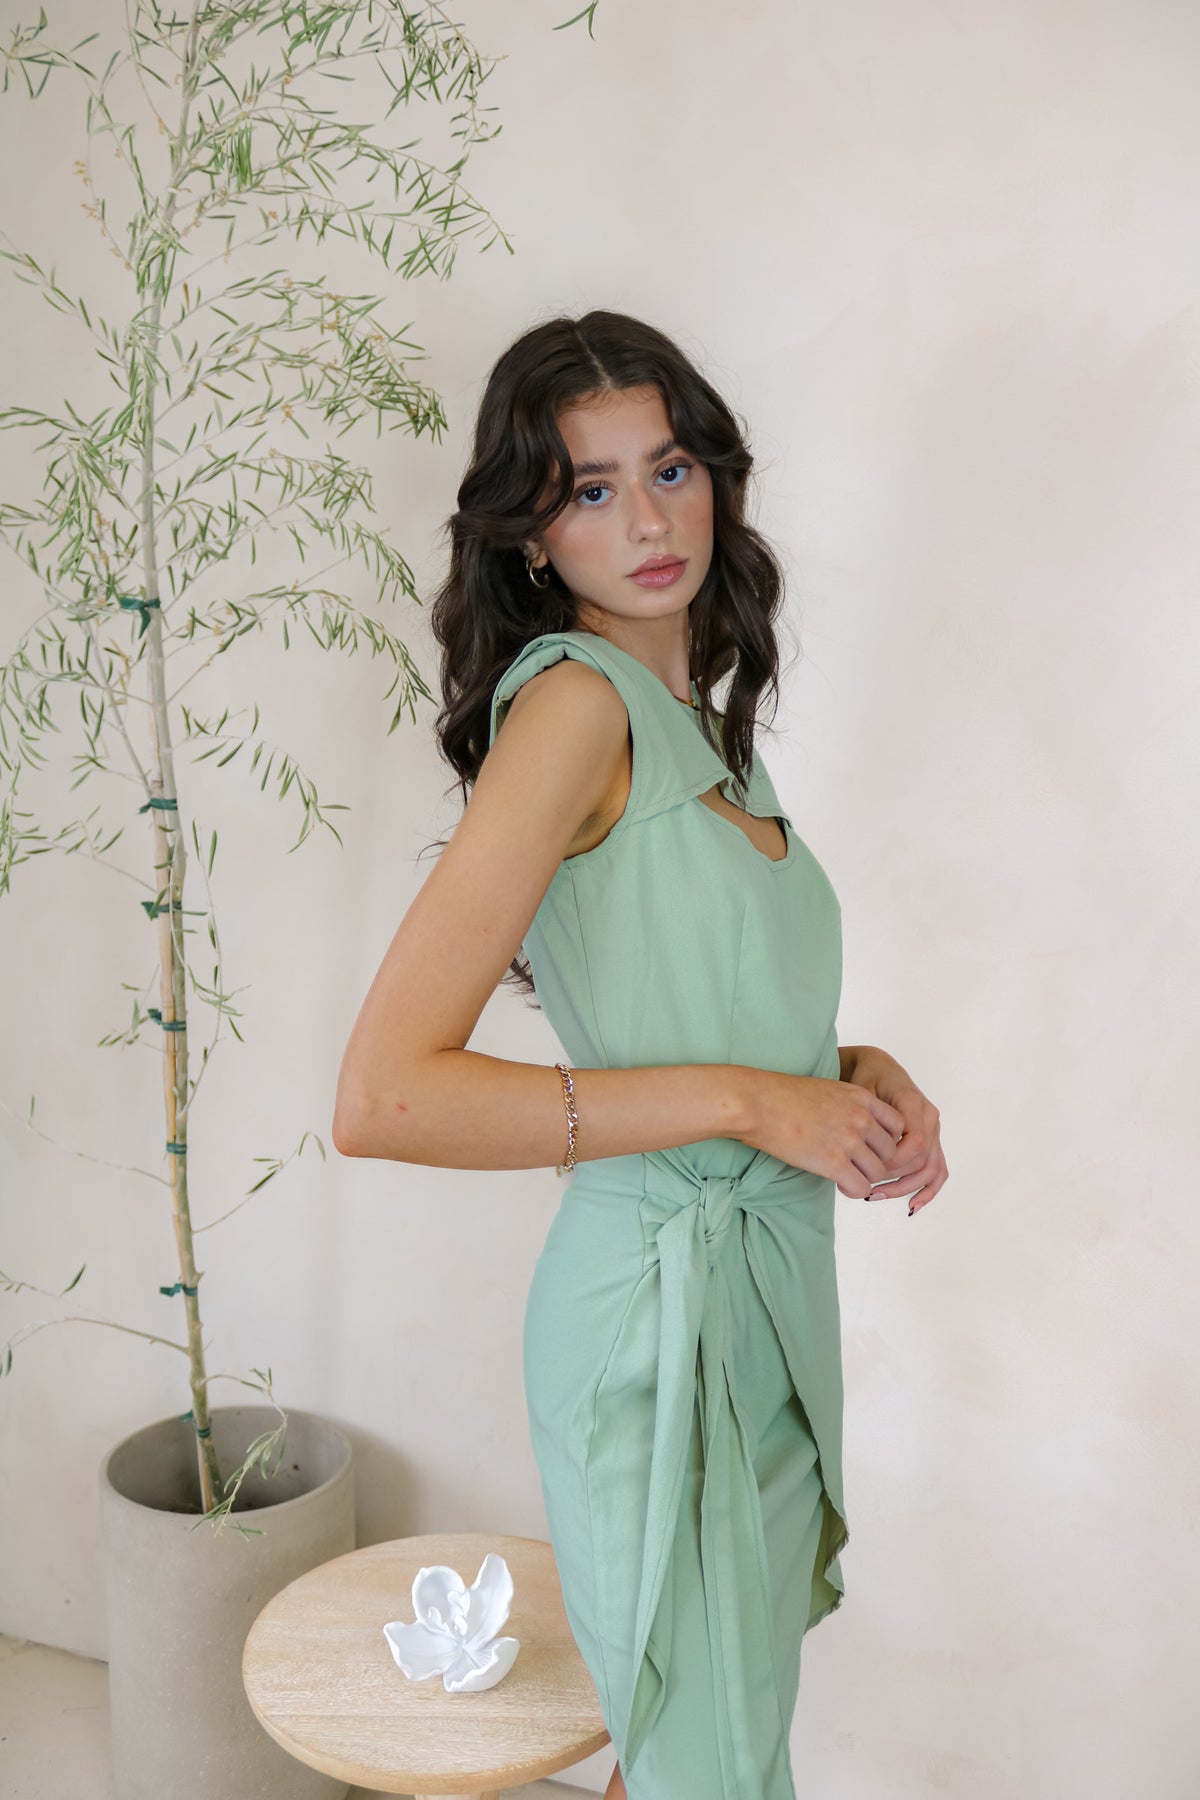 Elegant Asymmetrical Cut-Out Dress in Mint and Nepal Blue